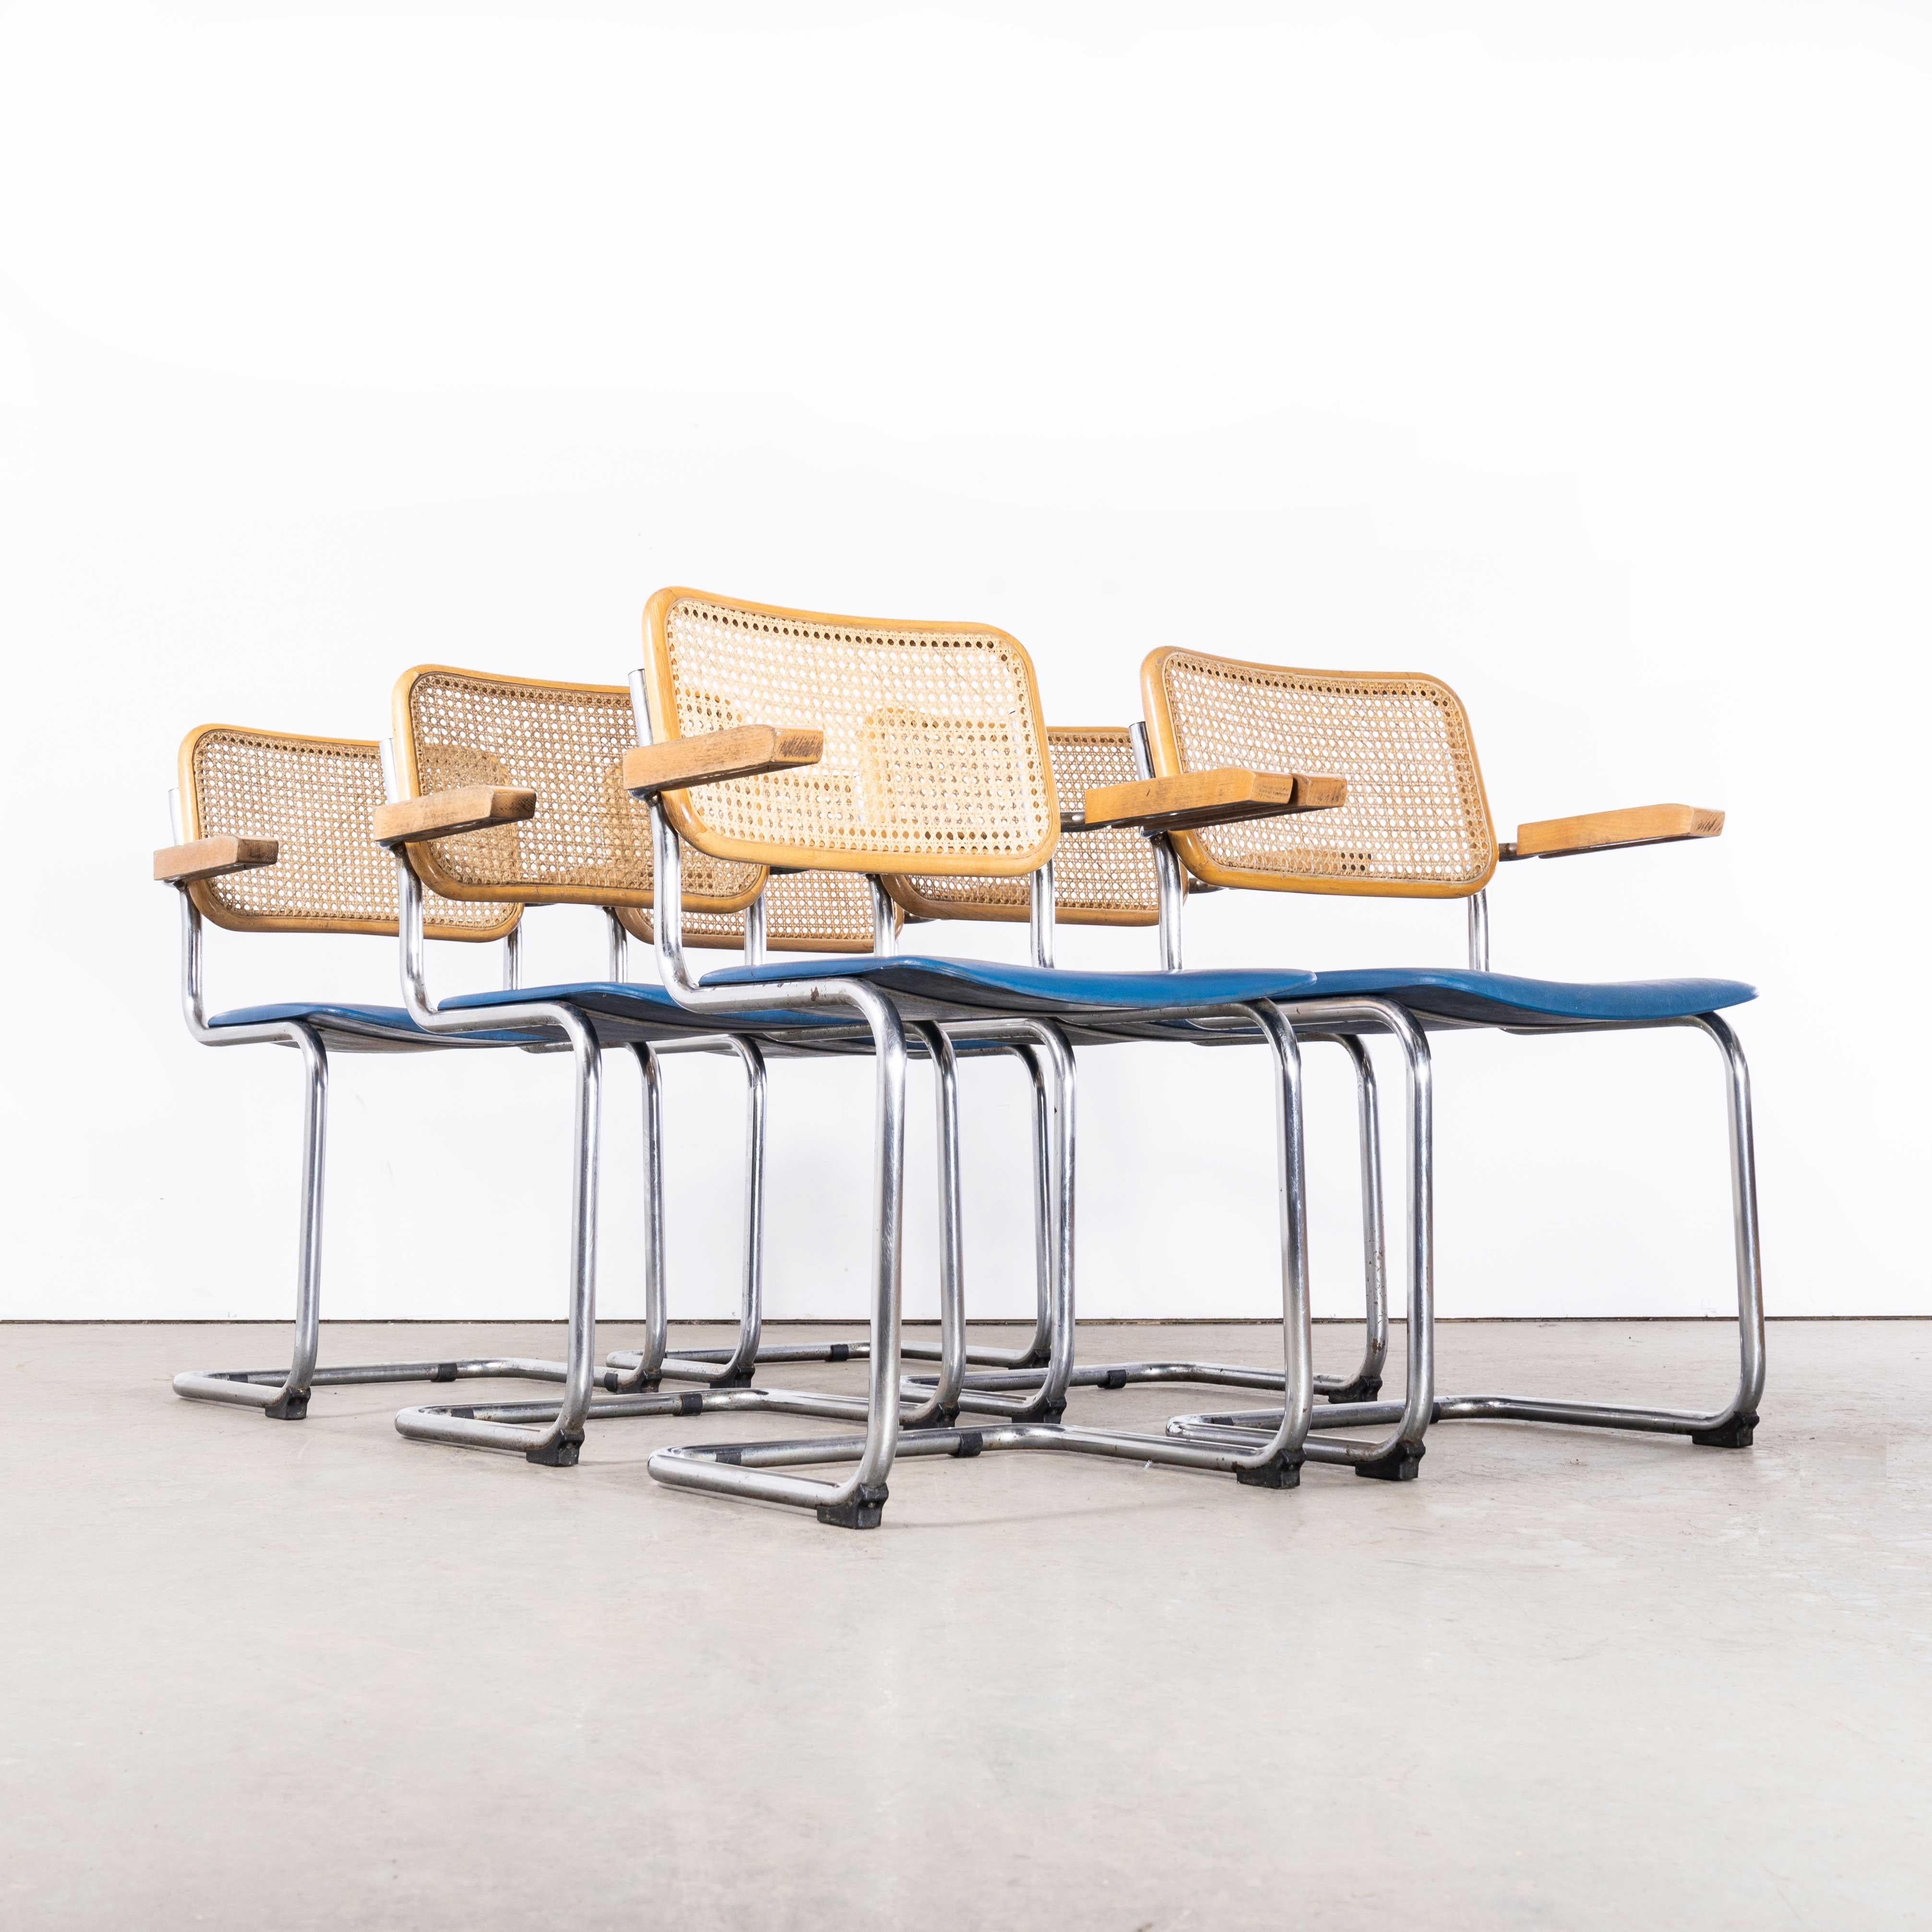 1970’s Cantilever Frame Cane Backed Blue Dining Chair – Set Of Six
1970’s Cantilever Frame Cane Backed Blue Dining Chair – Set Of Six. Classic Bauhaus style cantilever frame dining chair produced with chrome frames, blue seats and beech capped arms.